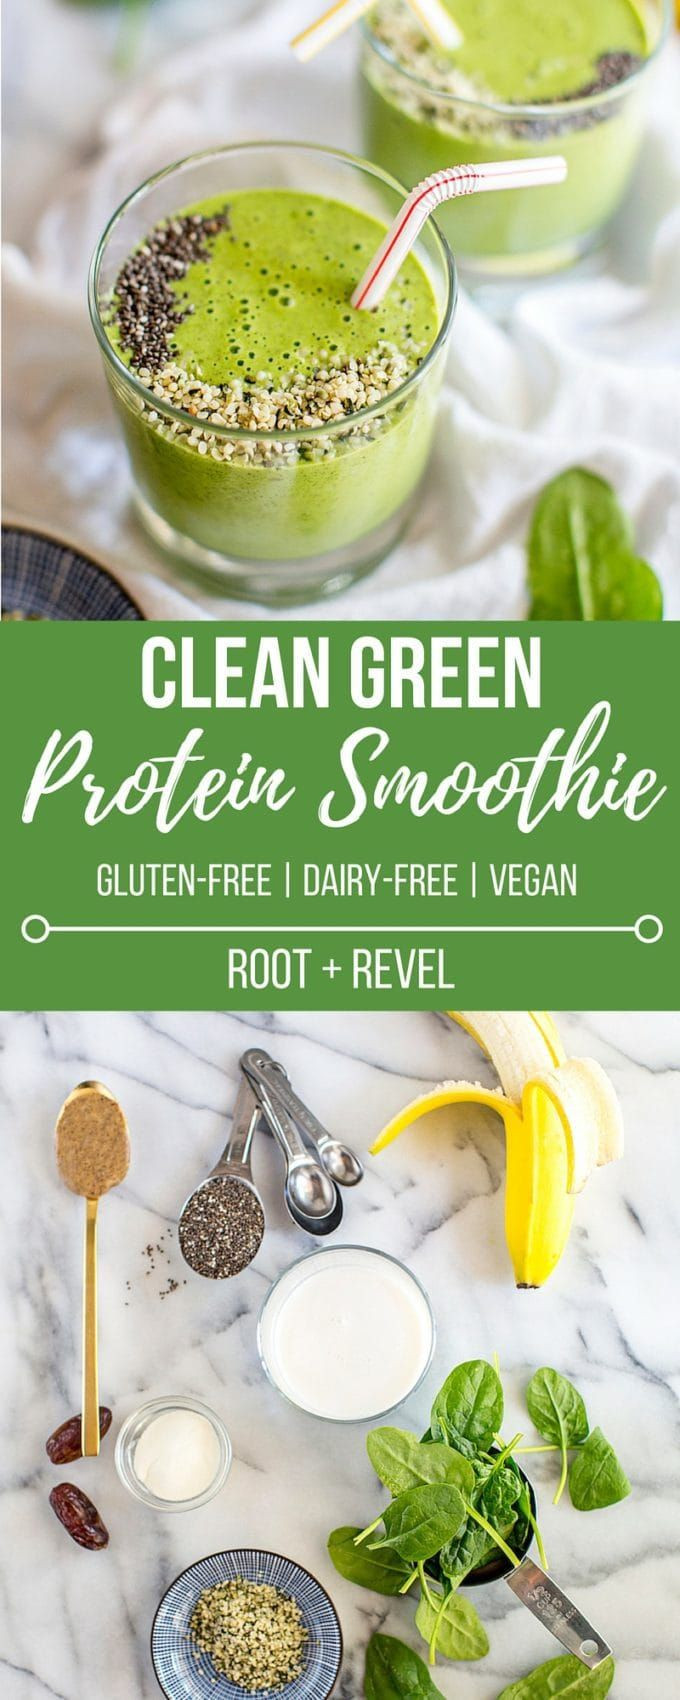 Vegan Smoothies For Weight Loss
 Green Vegan Protein Smoothie Recipe in 2020